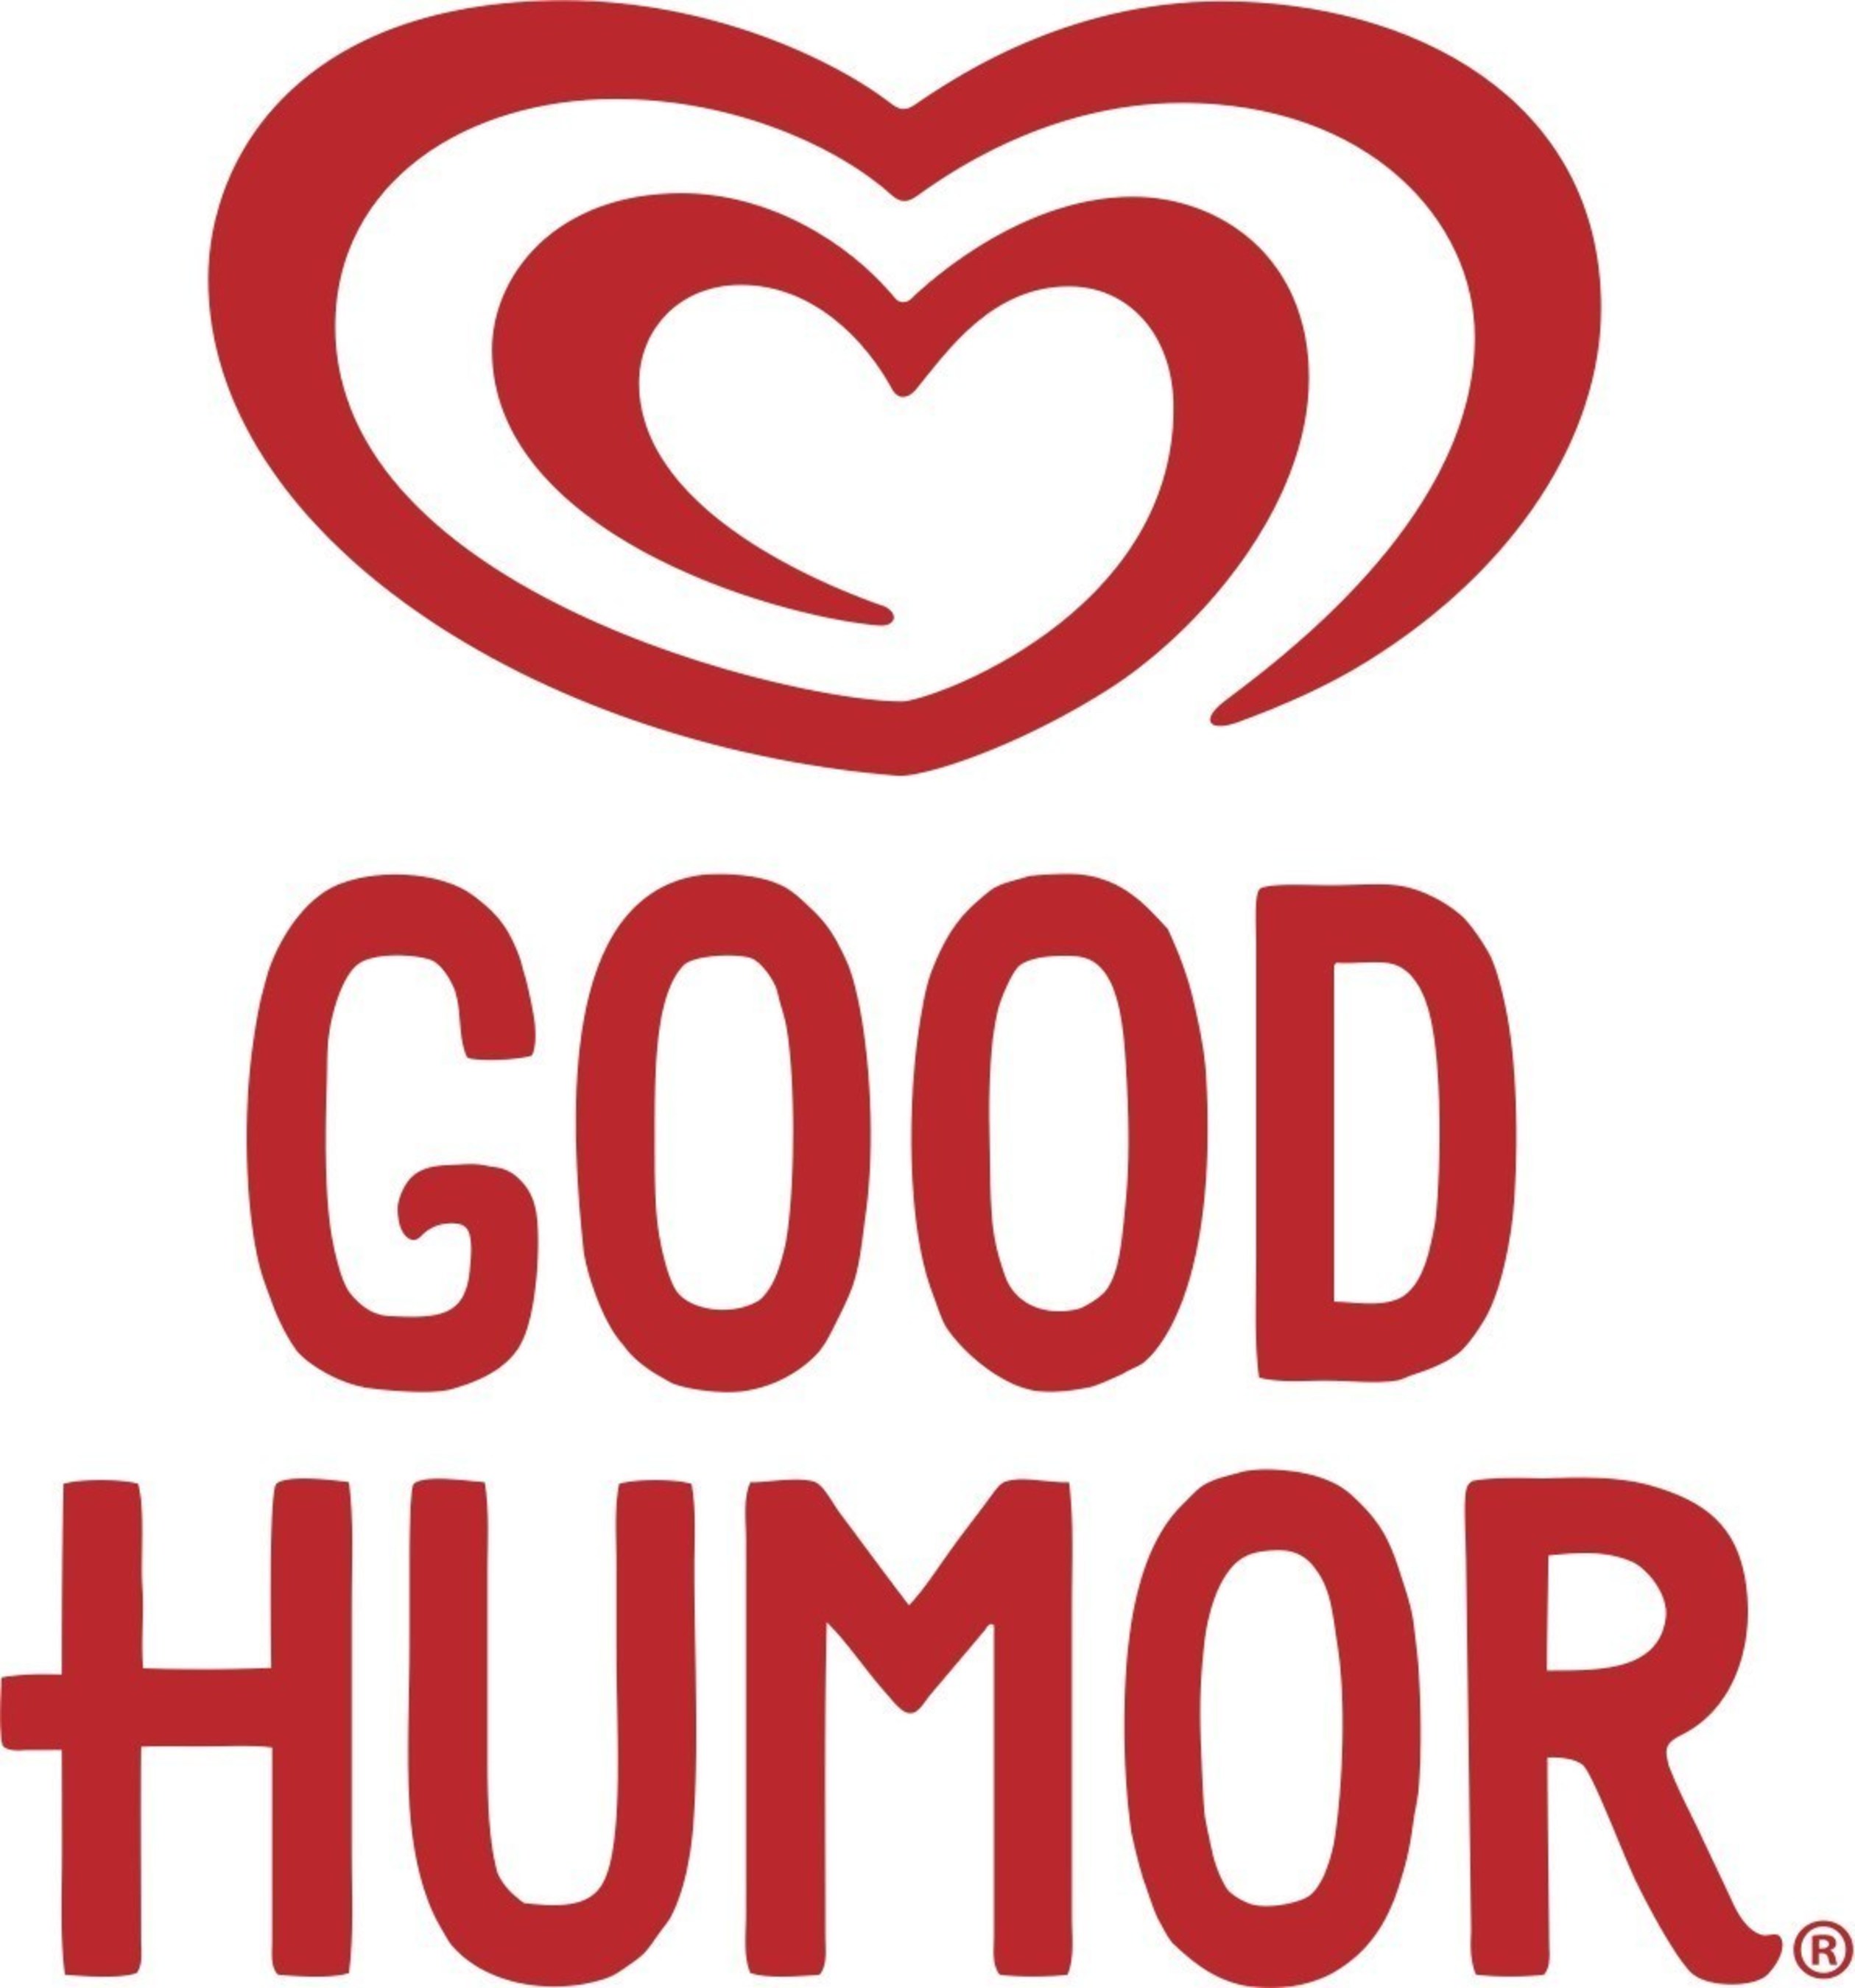 Good Humor (R) is traveling along the East Coast this summer for the "Welcome to Joyhood" tour. (PRNewsFoto/Good Humor)